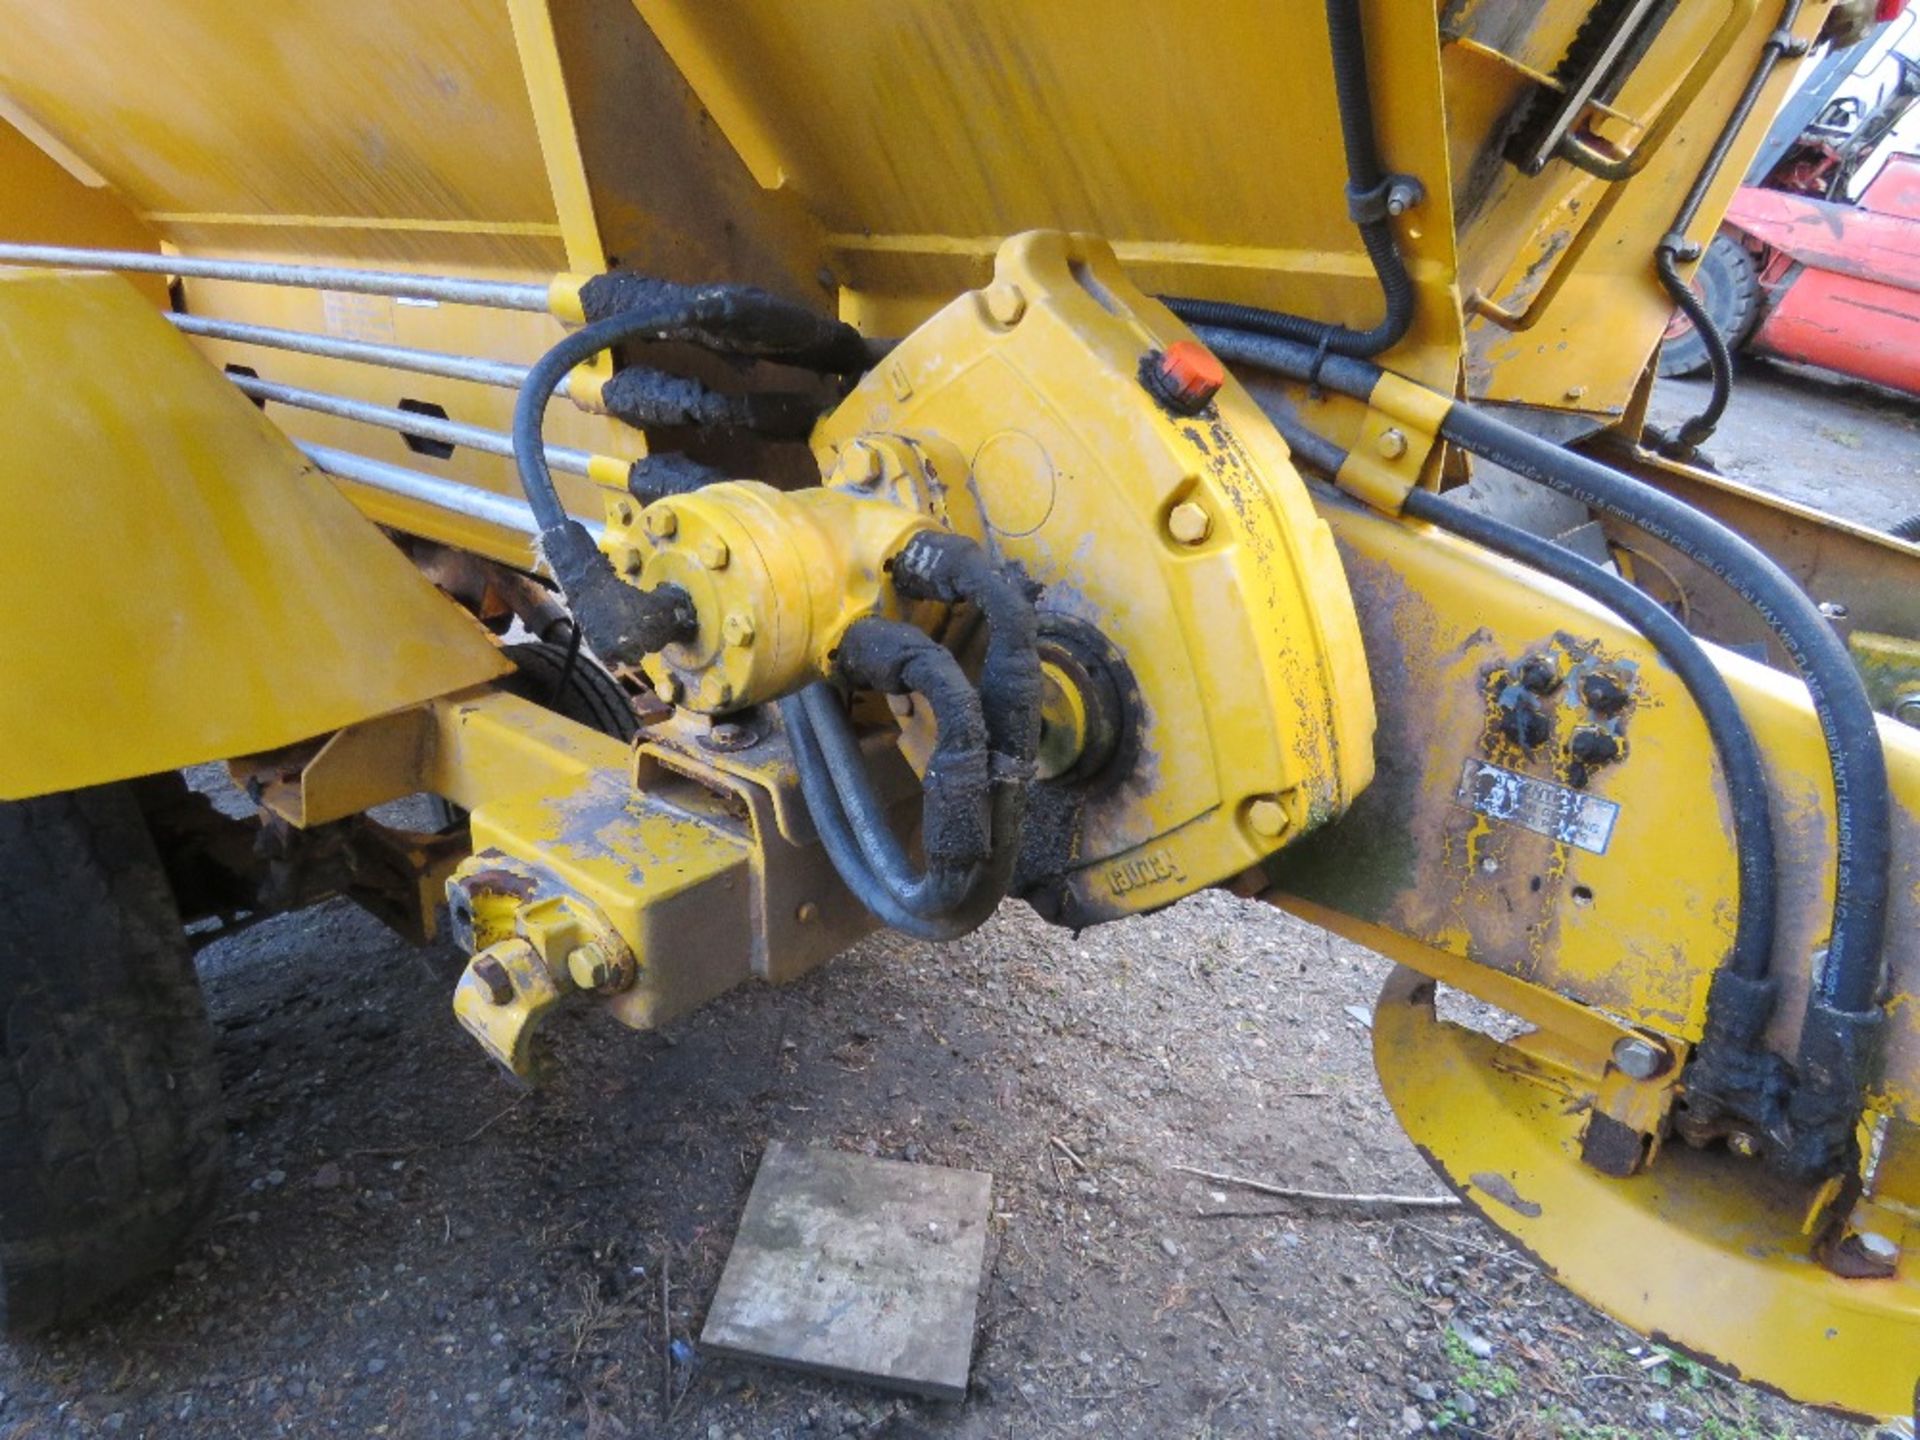 CHARITY LOT!! ECON SINGLE AXLED TOWED SALT SPREADER WITH WHEEL DRIVEN HYDRAULIC SYSTEM. UNUSED FOR - Image 7 of 13